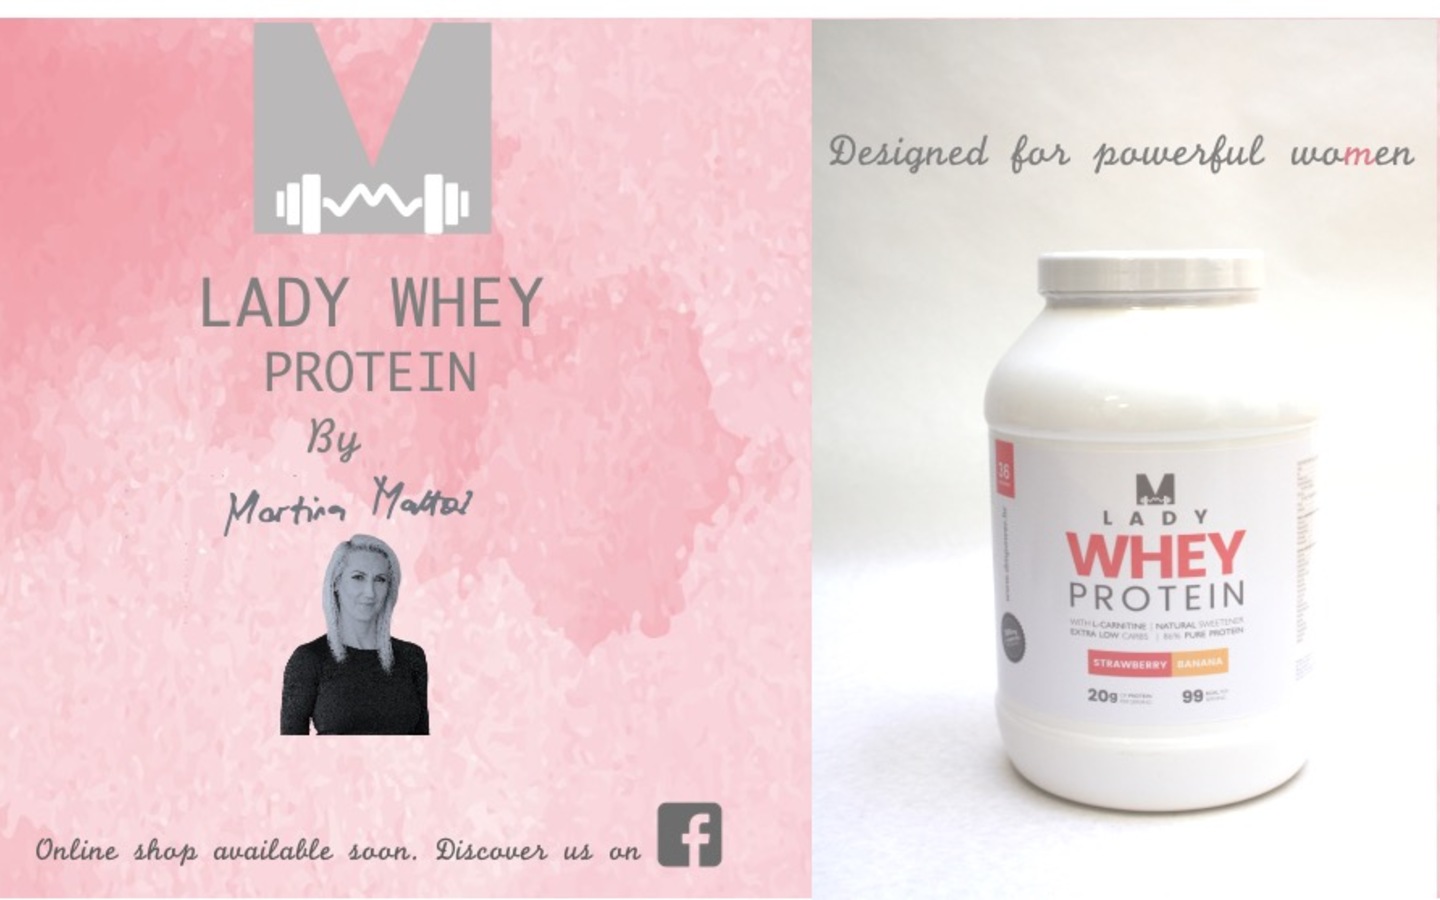 LADY WHEY PROTEIN  CREATED BY WOMEN, FOR WOMEN